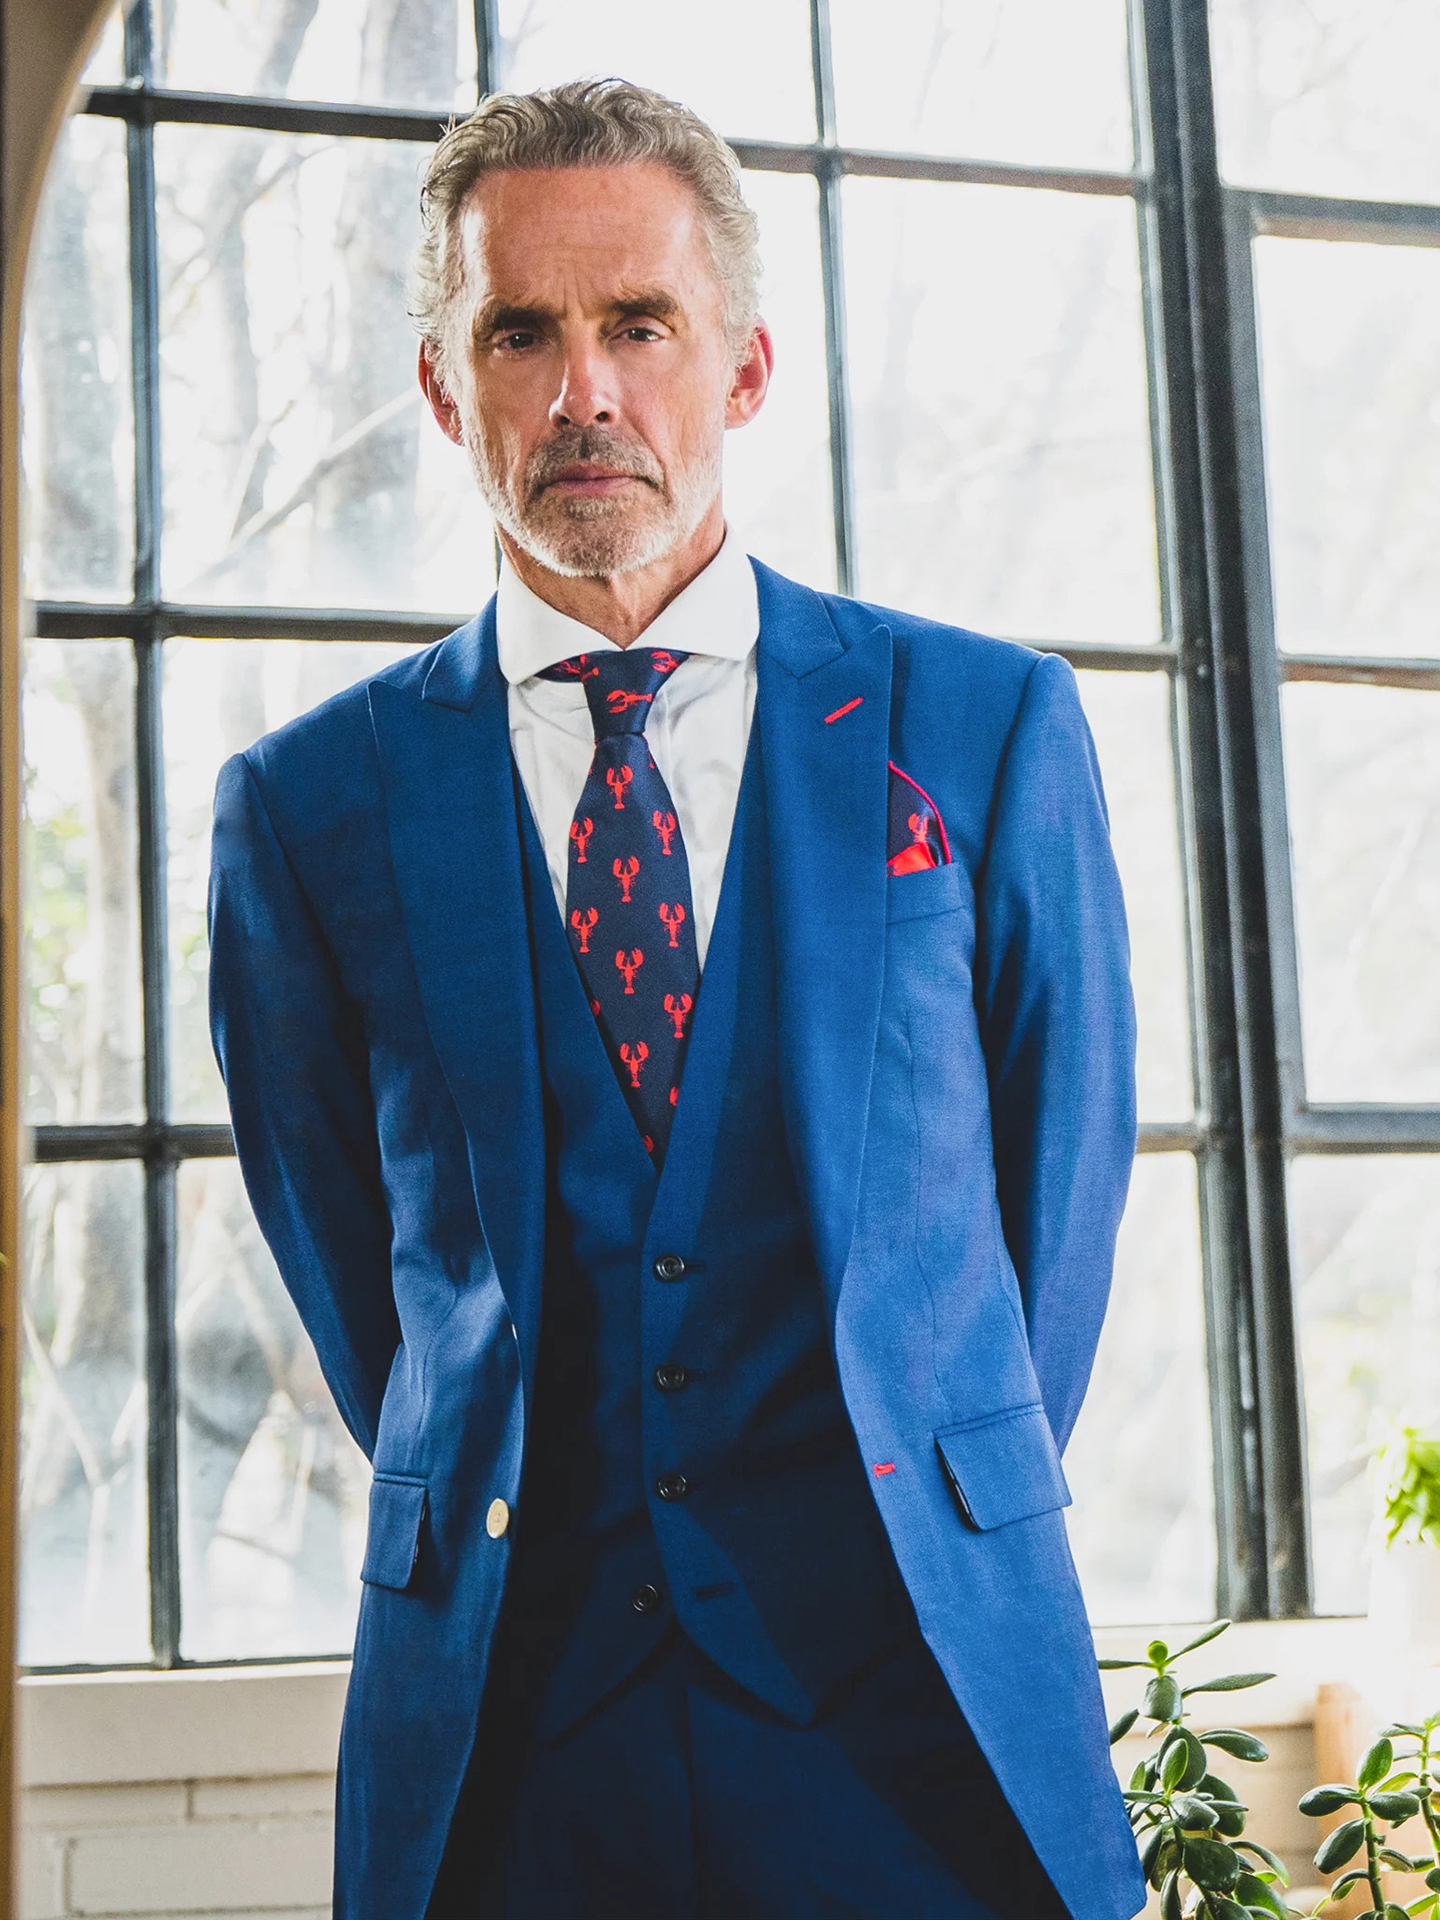 How to Dress Like Jordan Peterson - Suits Expert